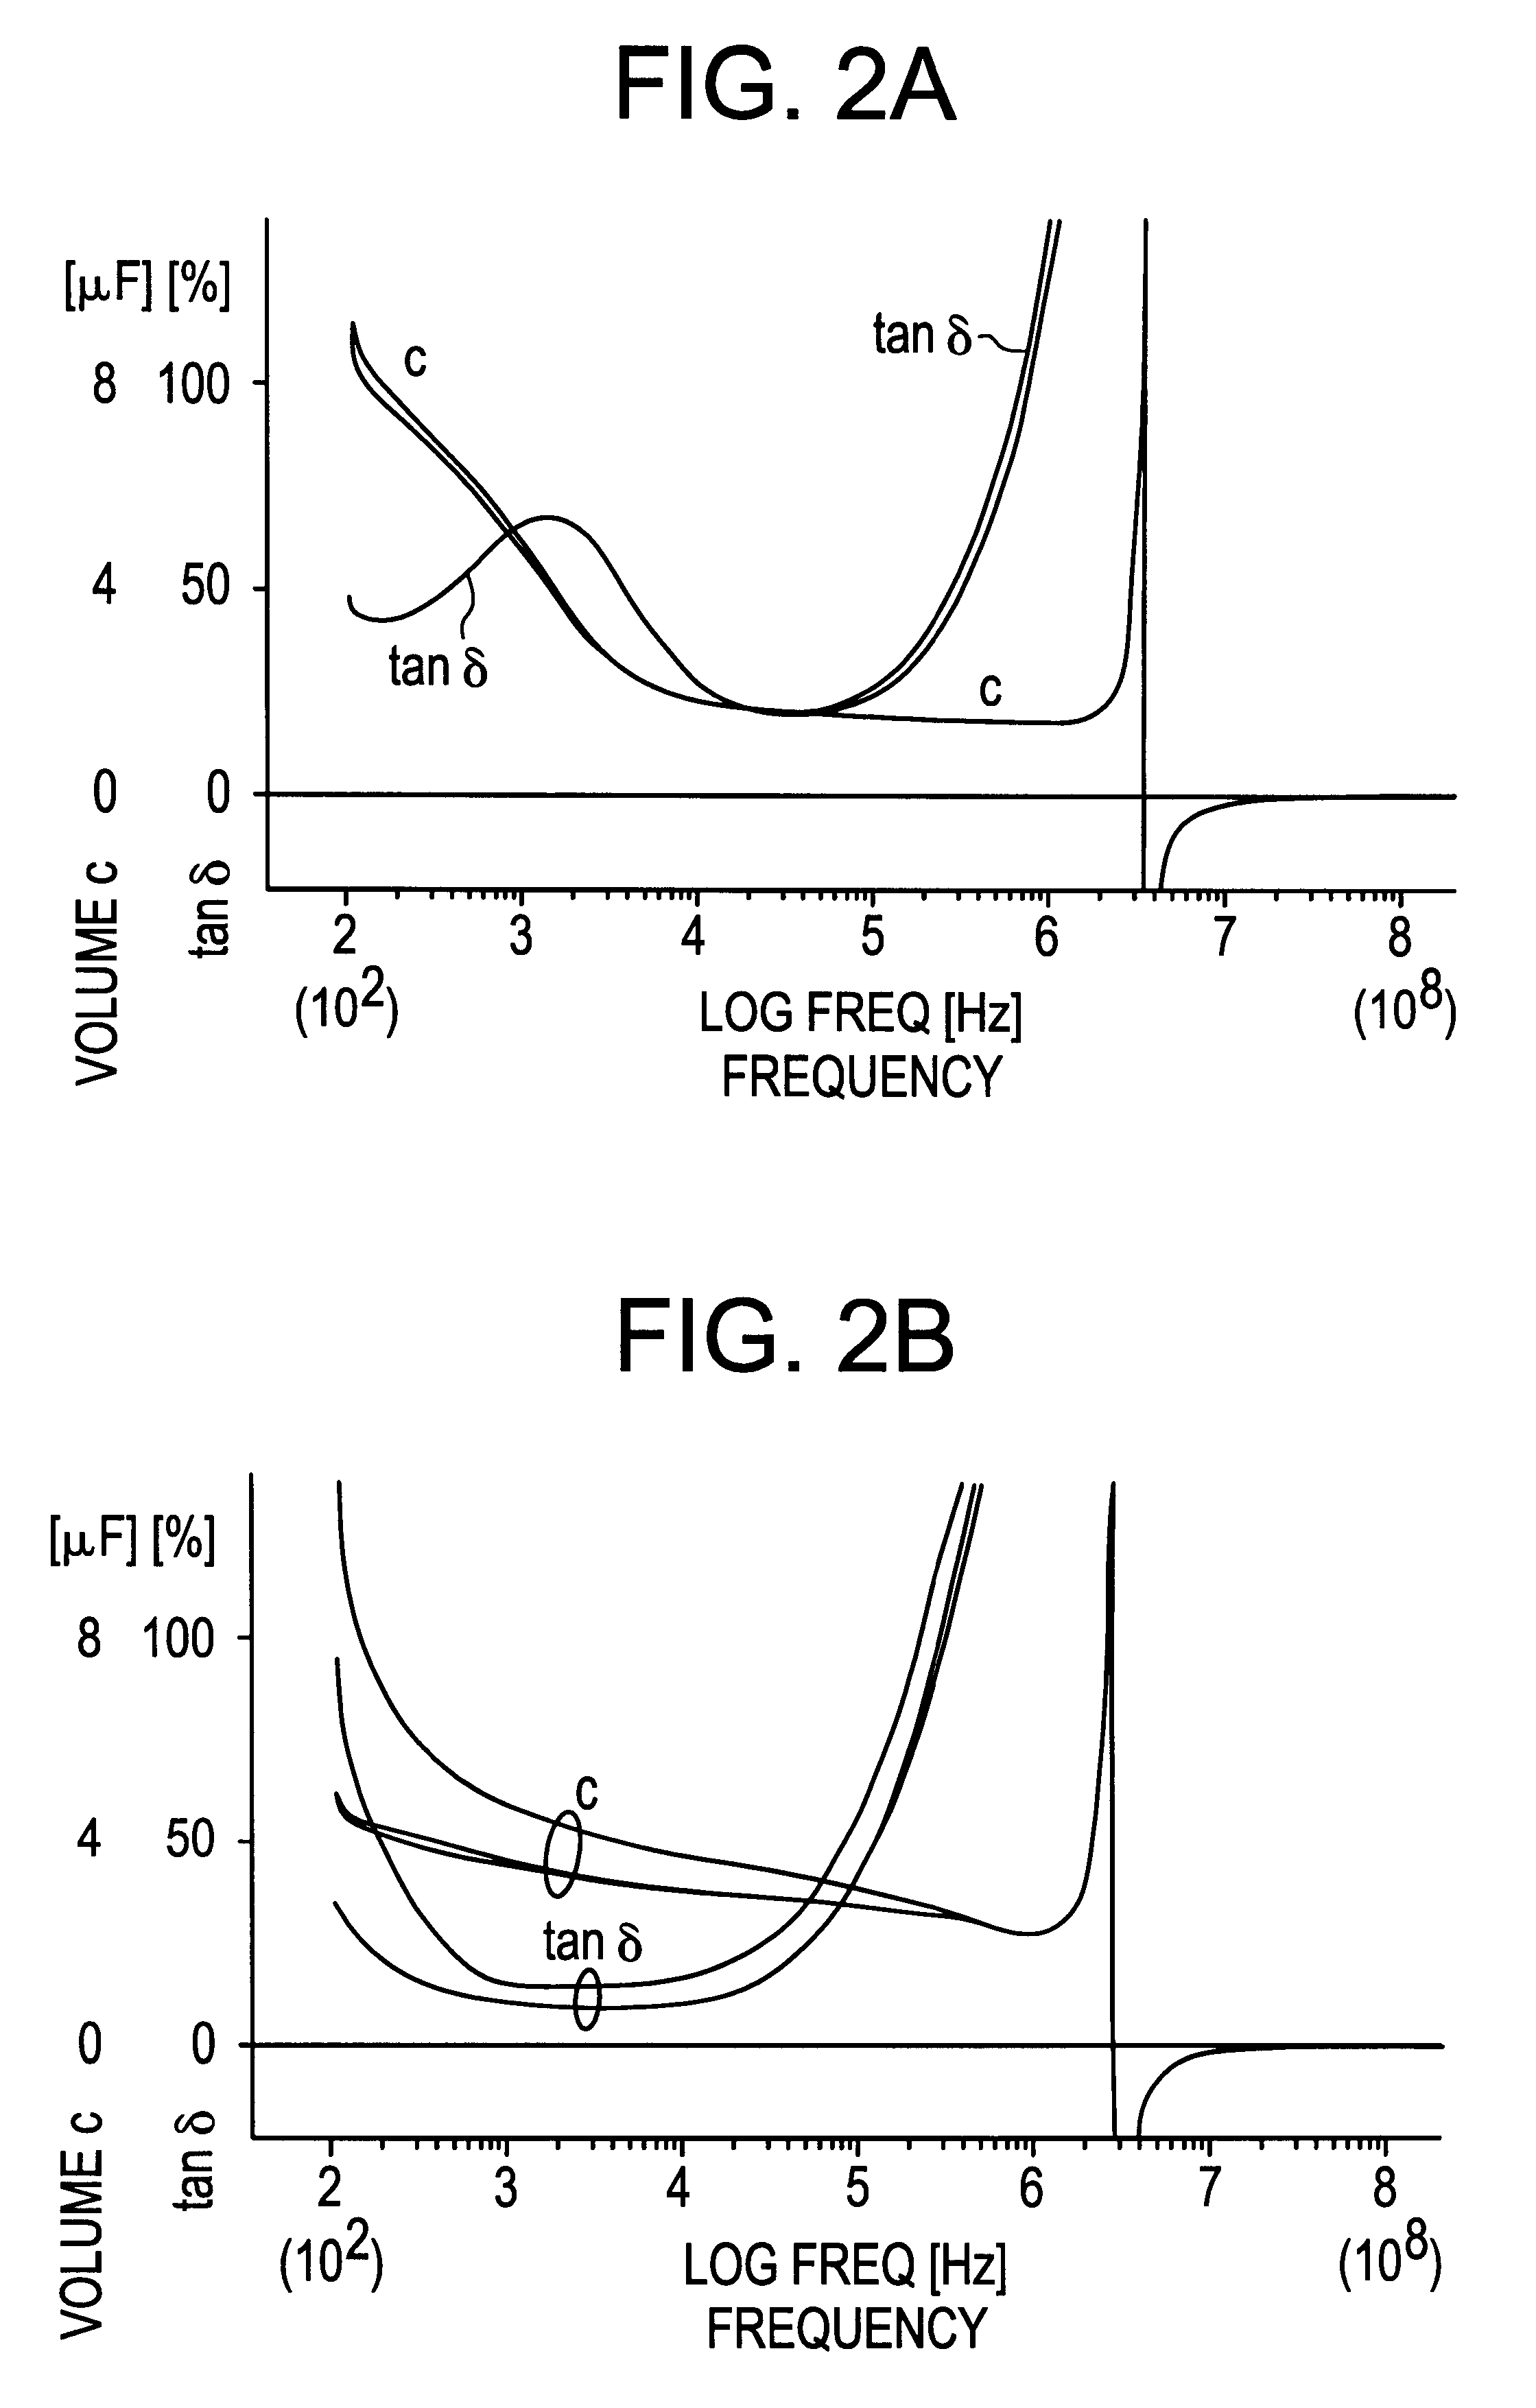 Process for preparing a Nb capacitor